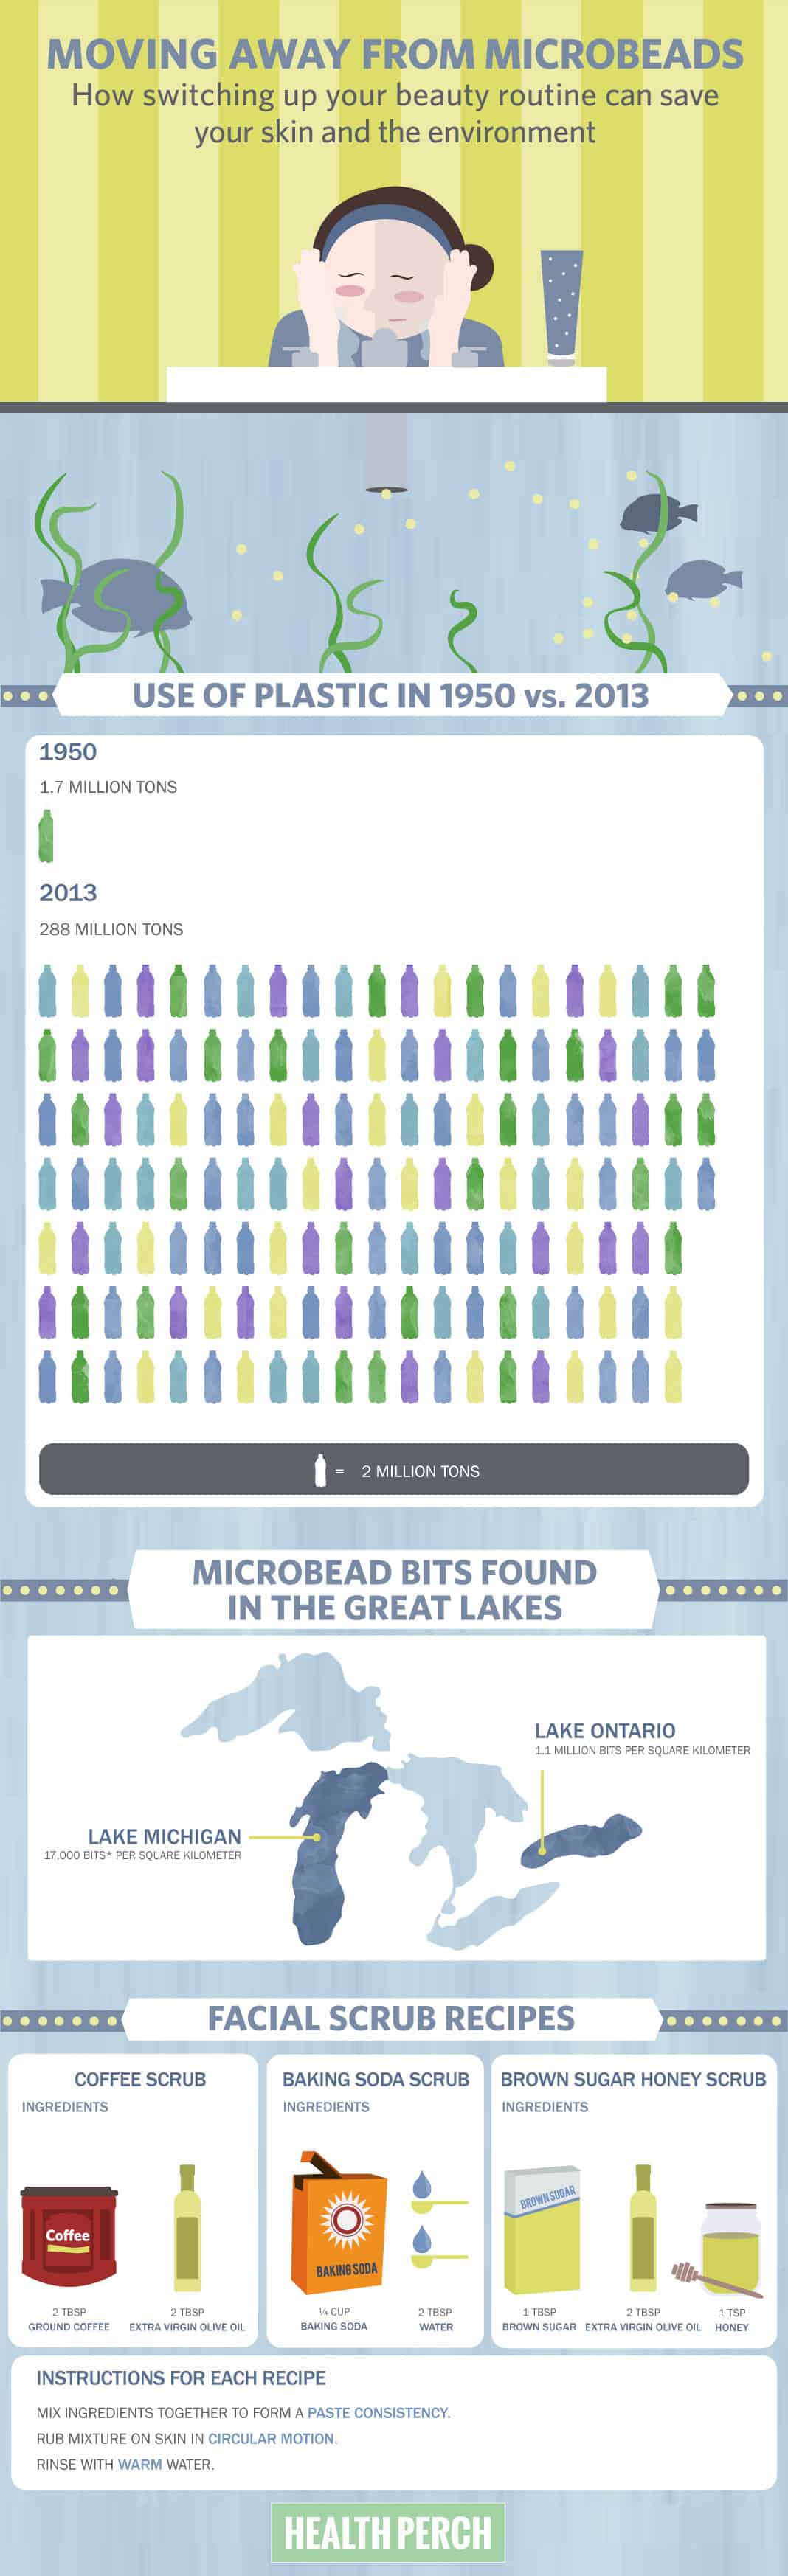 Microbeads & The Environment